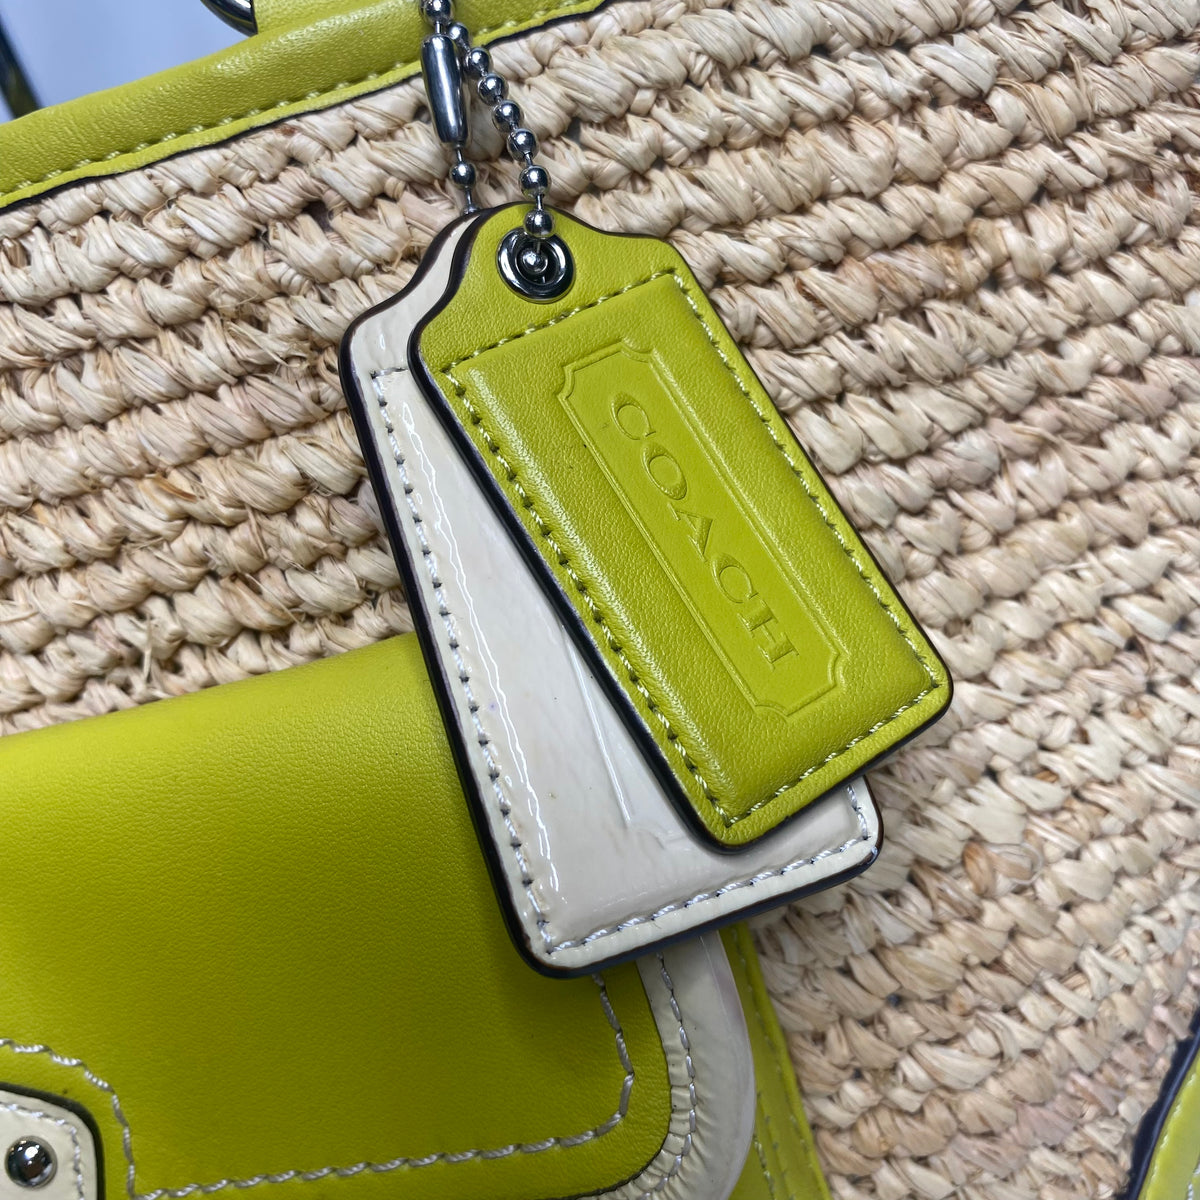 Coach Lime Green Straw and Leather Small Tote Bag